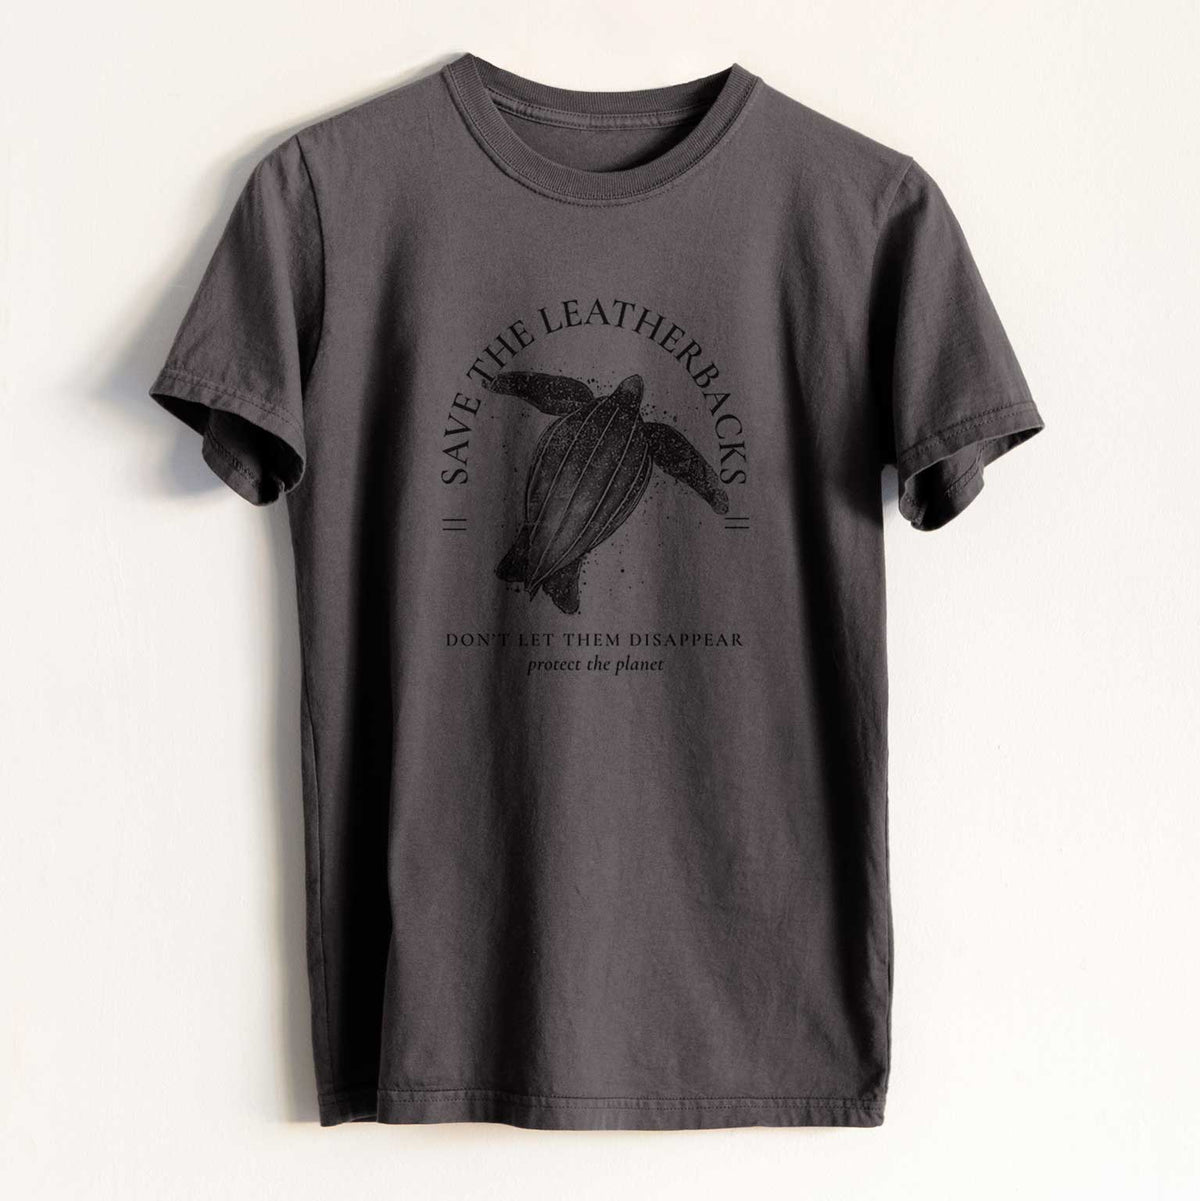 Save the Leatherbacks - Don&#39;t Let Them Disappear - Heavyweight Men&#39;s 100% Organic Cotton Tee